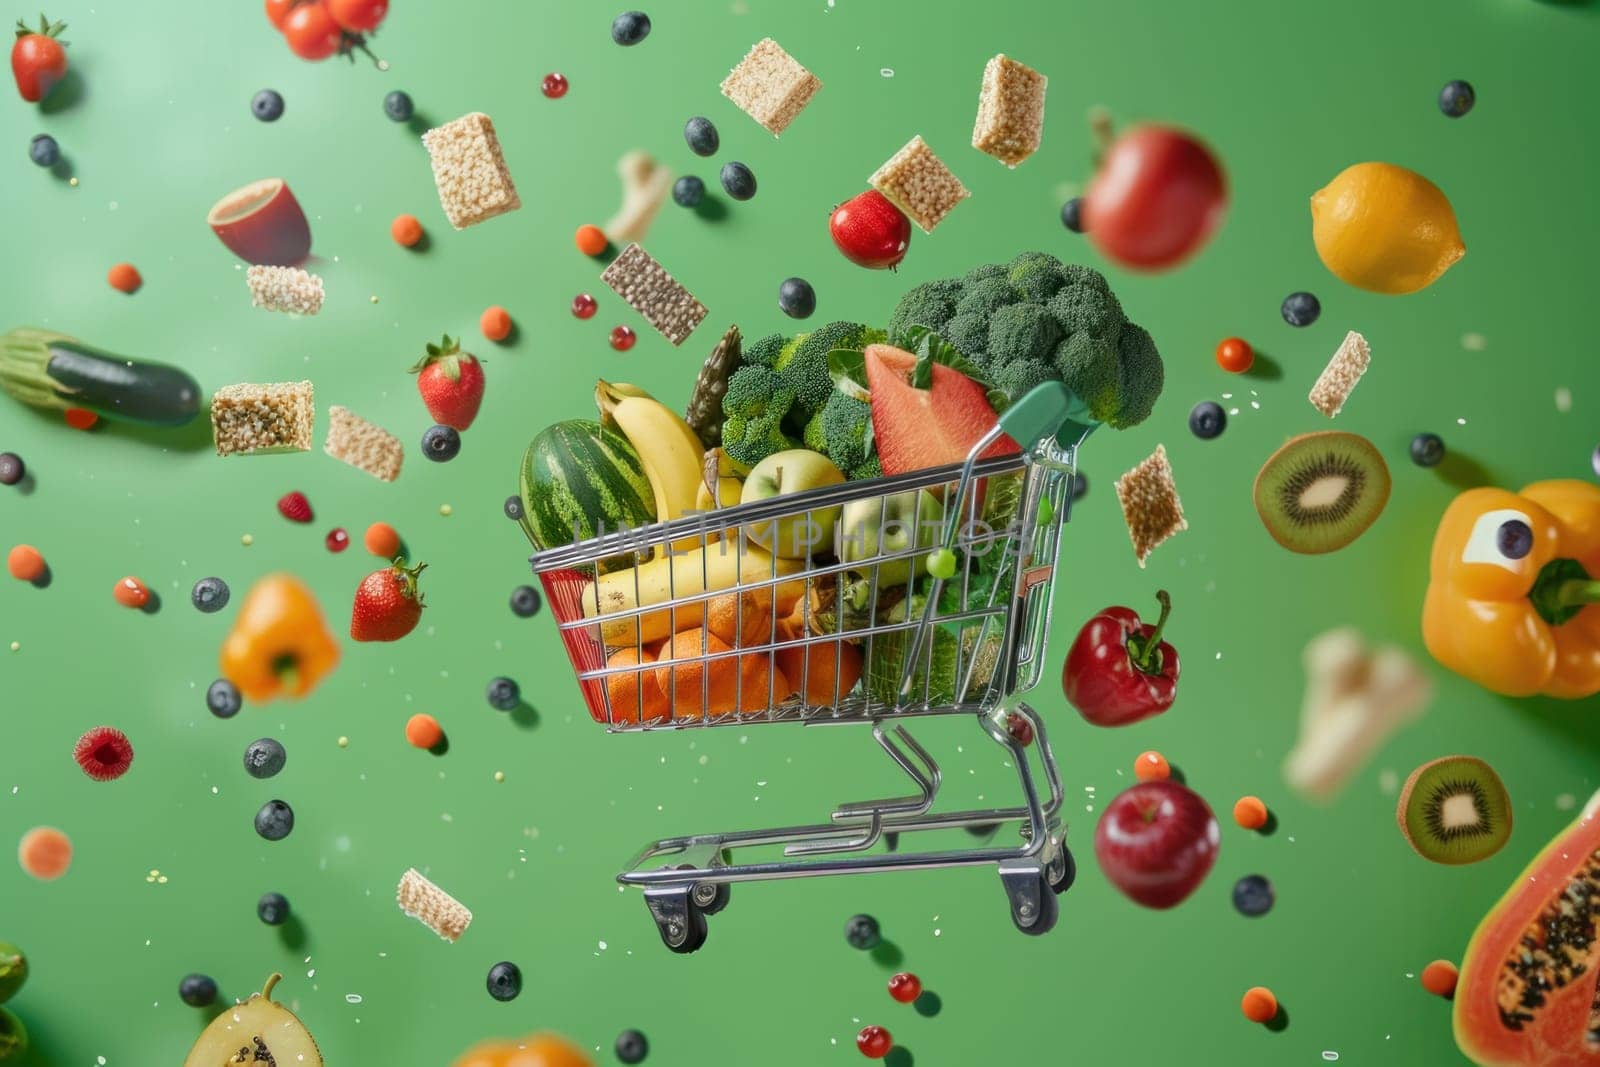 A shopping cart filled with fruits and vegetables is flying through the air. The cart is surrounded by a variety of fruits and vegetables, including bananas, apples, oranges, and broccoli